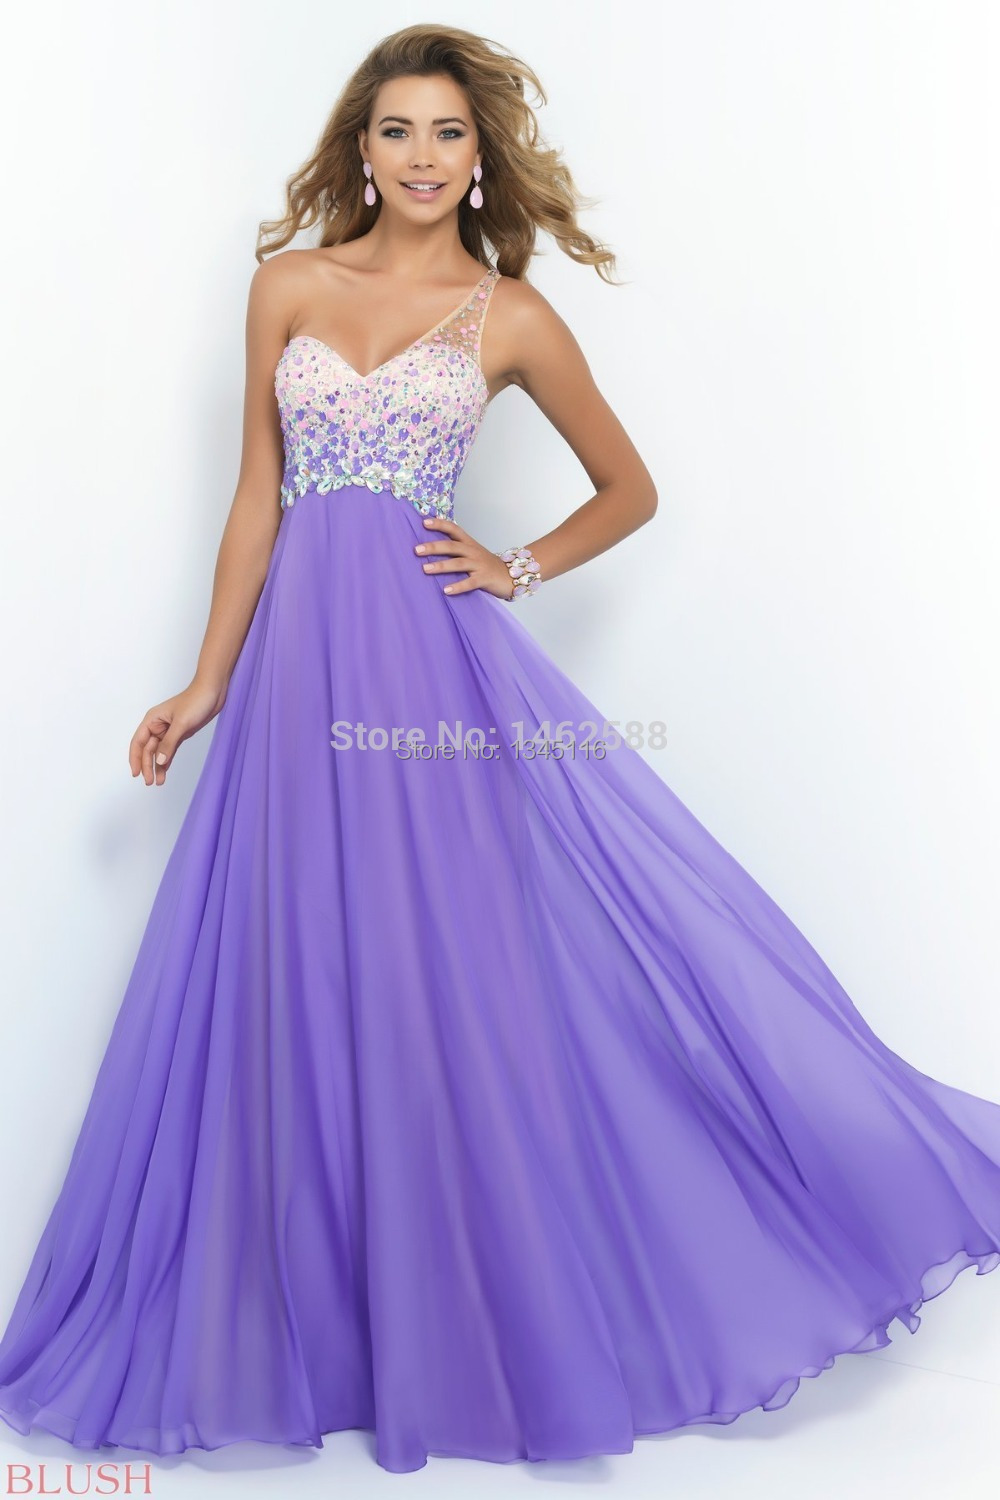 Images of Cheap Prom Dress Stores Near Me - Reikian